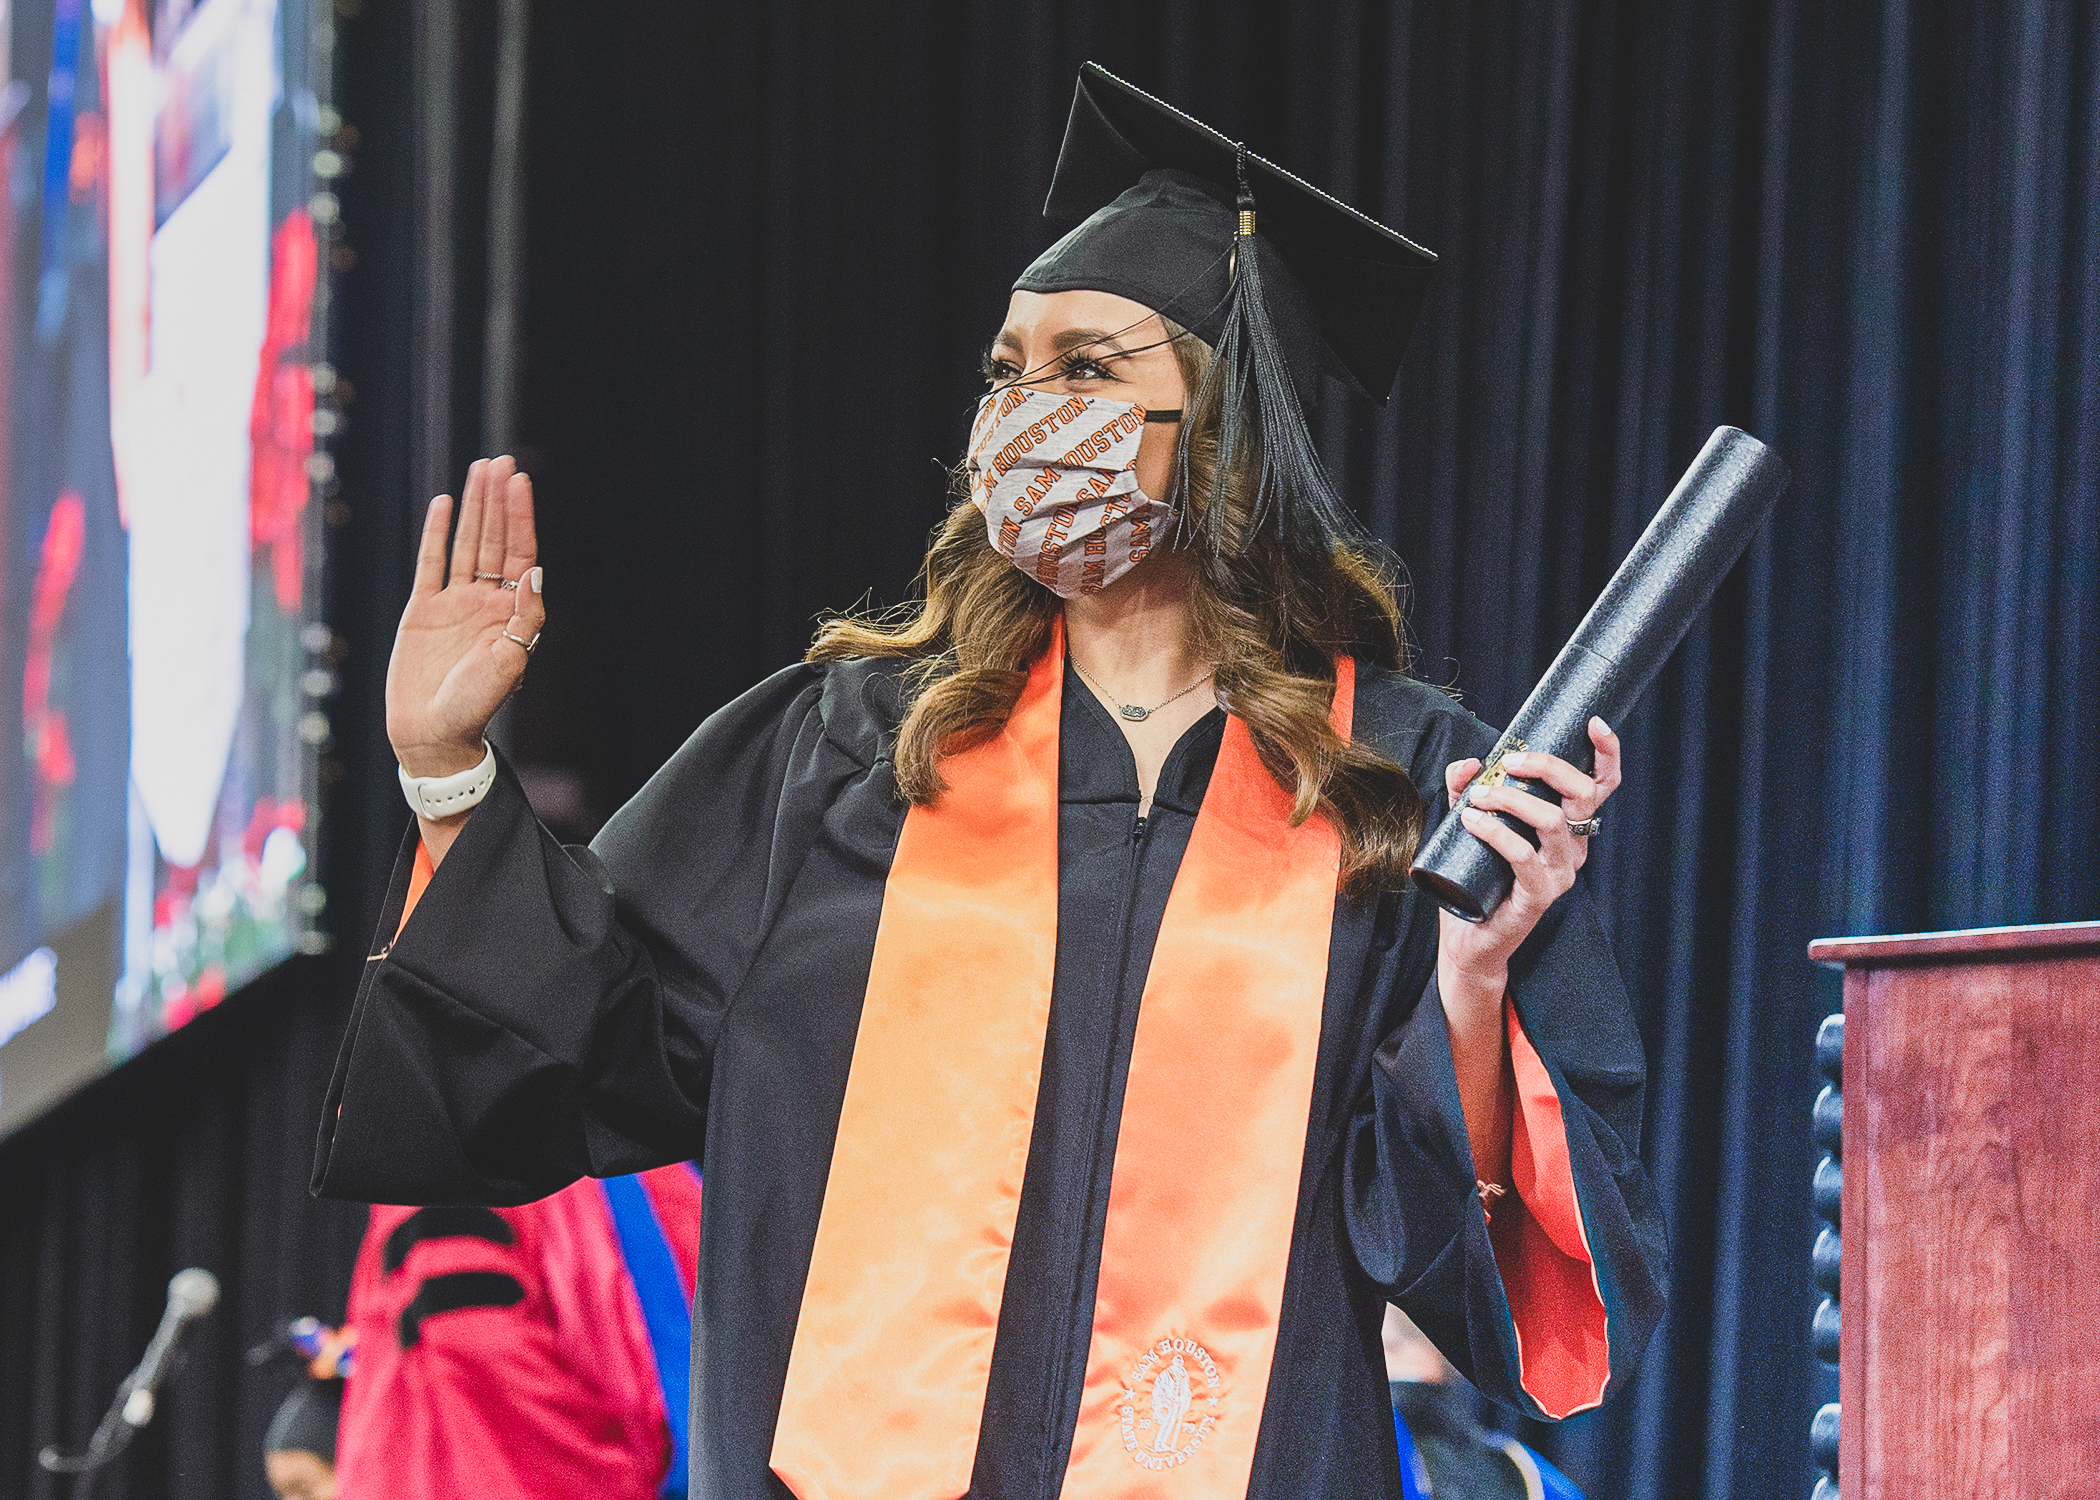 Student standing on Commencement stage holding a diploma and waving